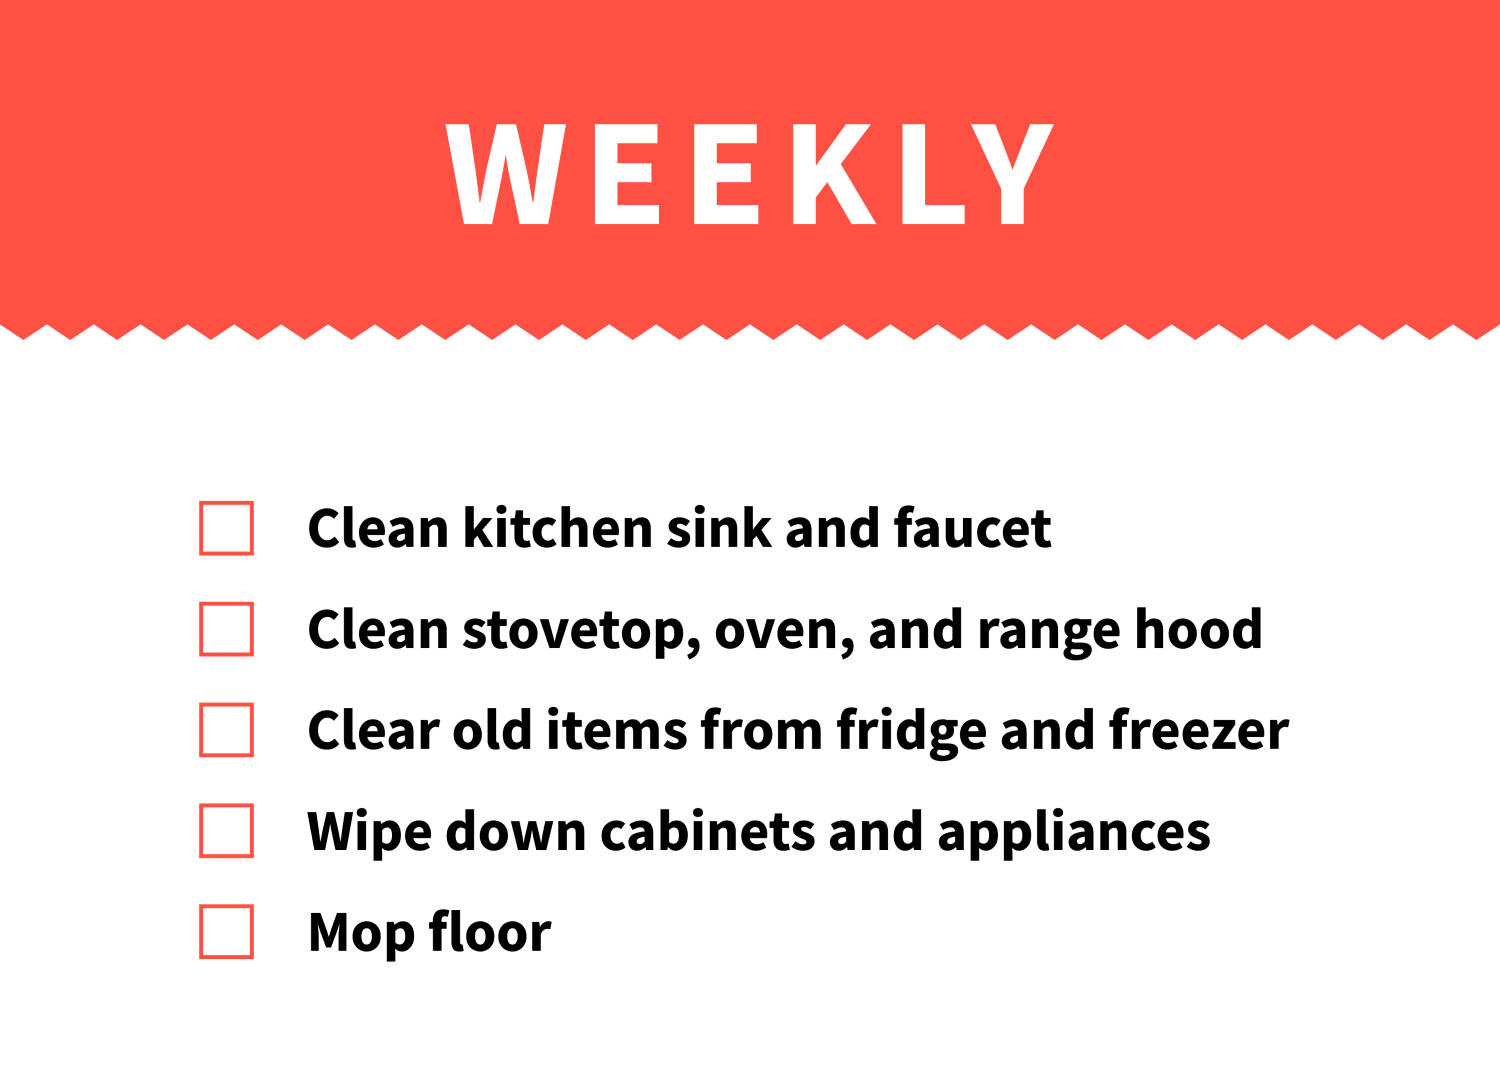 https://media-cldnry.s-nbcnews.com/image/upload/rockcms/2023-03/weekly-kitchen-cleaning-checklist-ba72cd.png